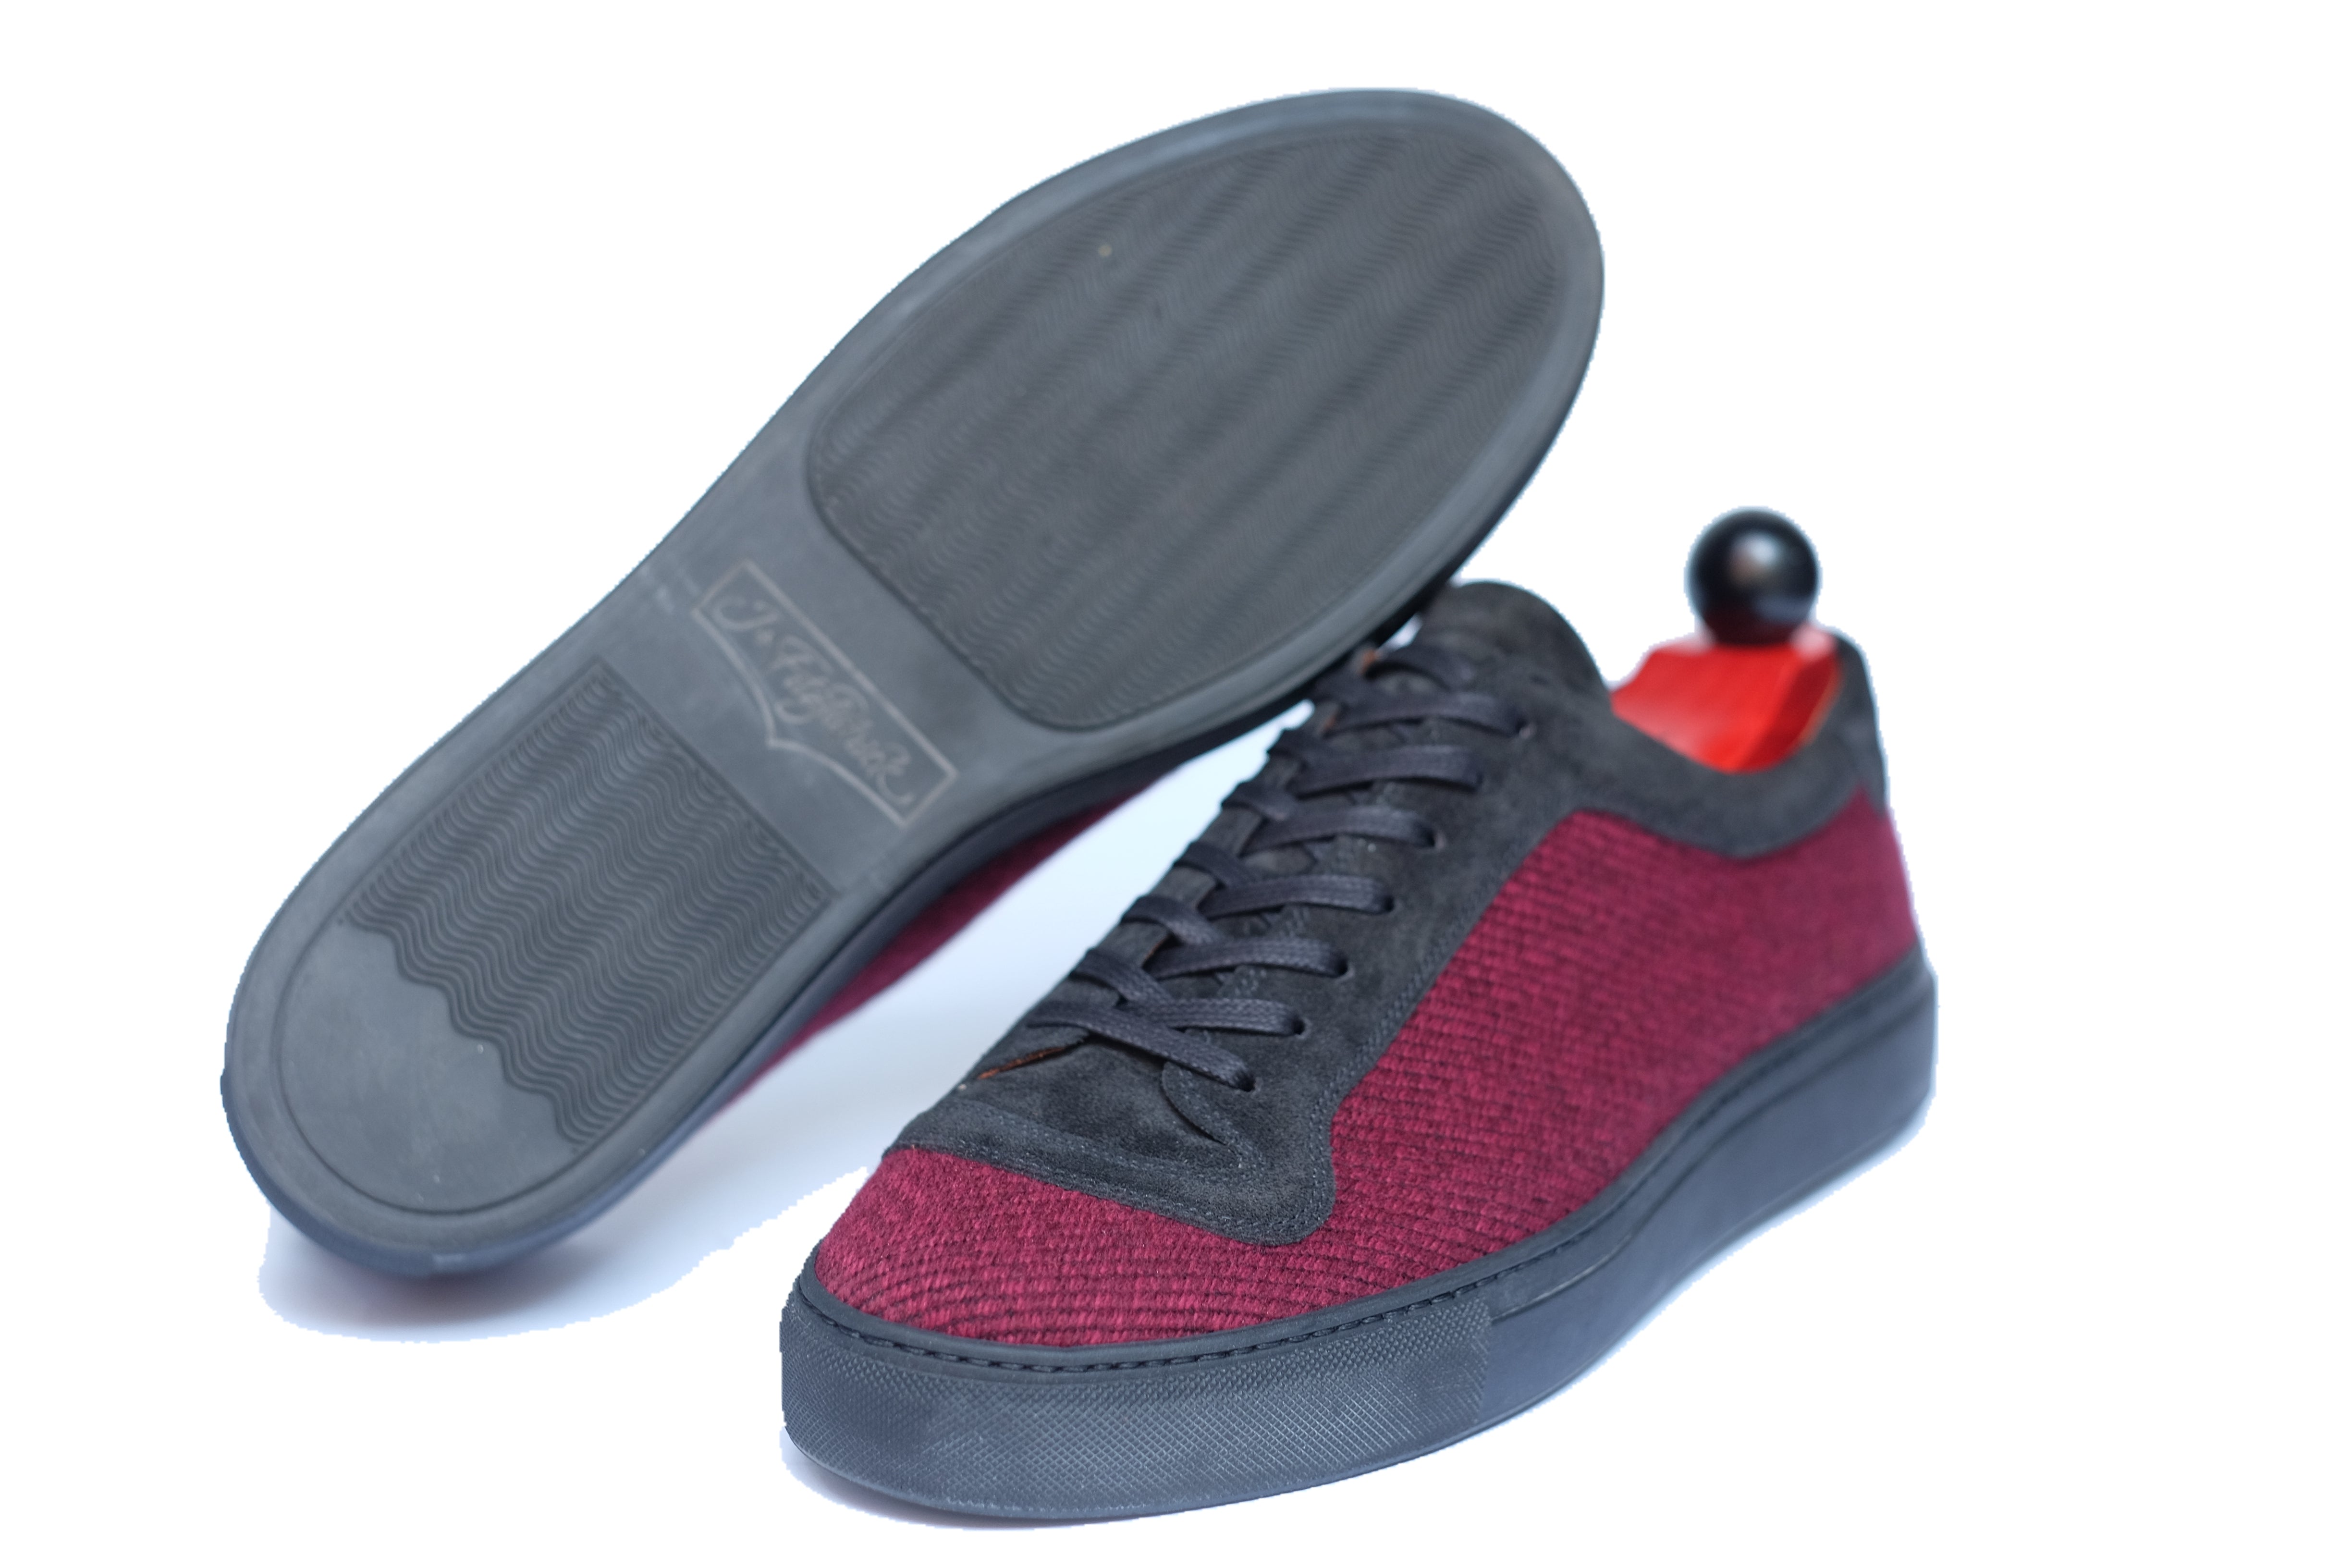 Woodinville - Red Poulsbo Tweed / Black Suede - CLEARANCE